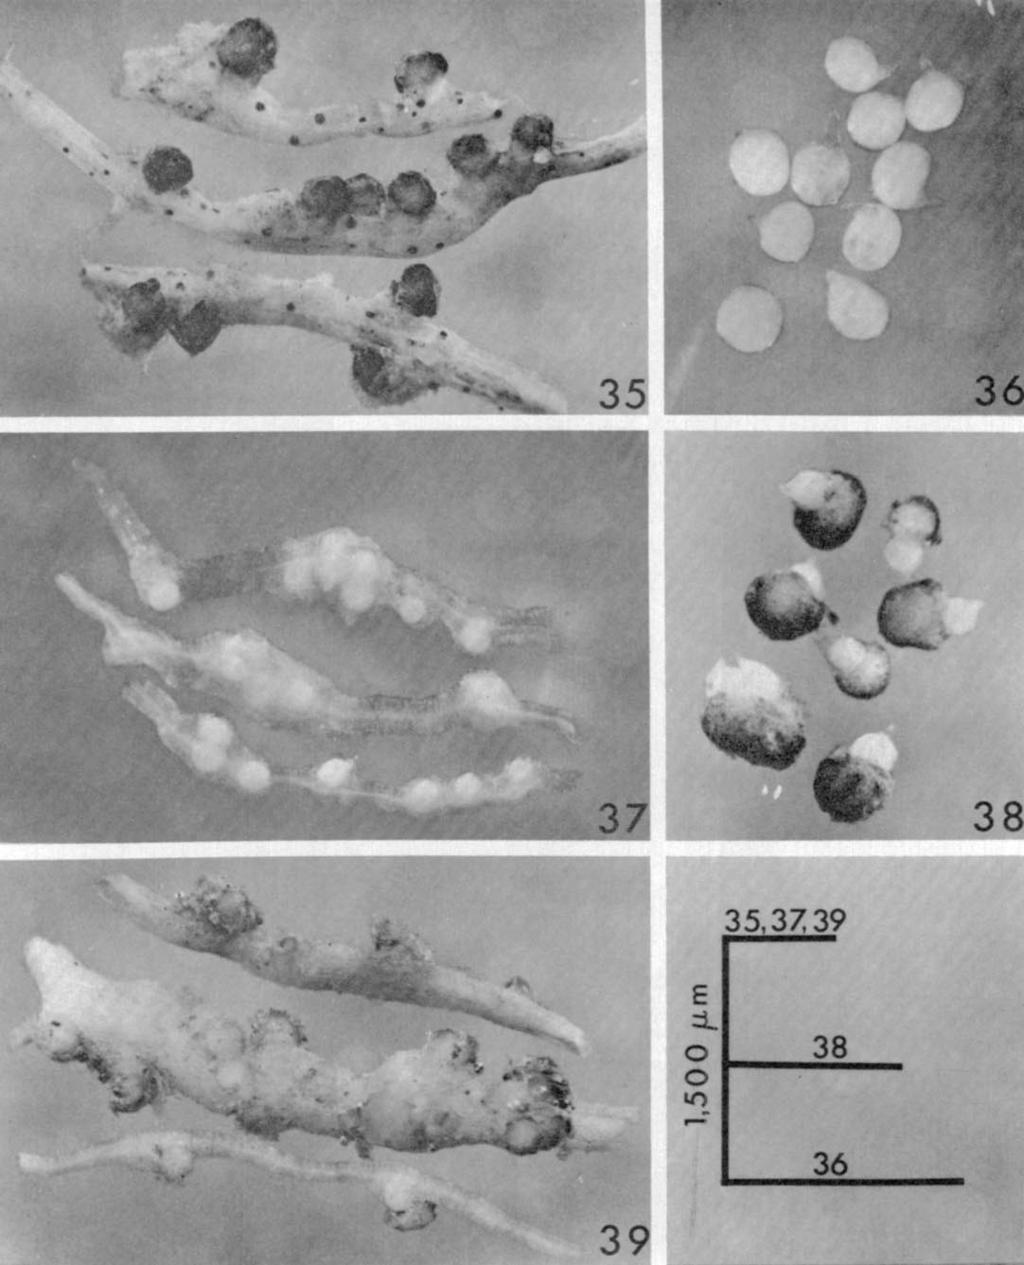 38) Females (from tomato) with egg sacs attached (note the two females with fused egg sacs, lower left). 39) nfected tomato roots with most egg sacs still attached to females.